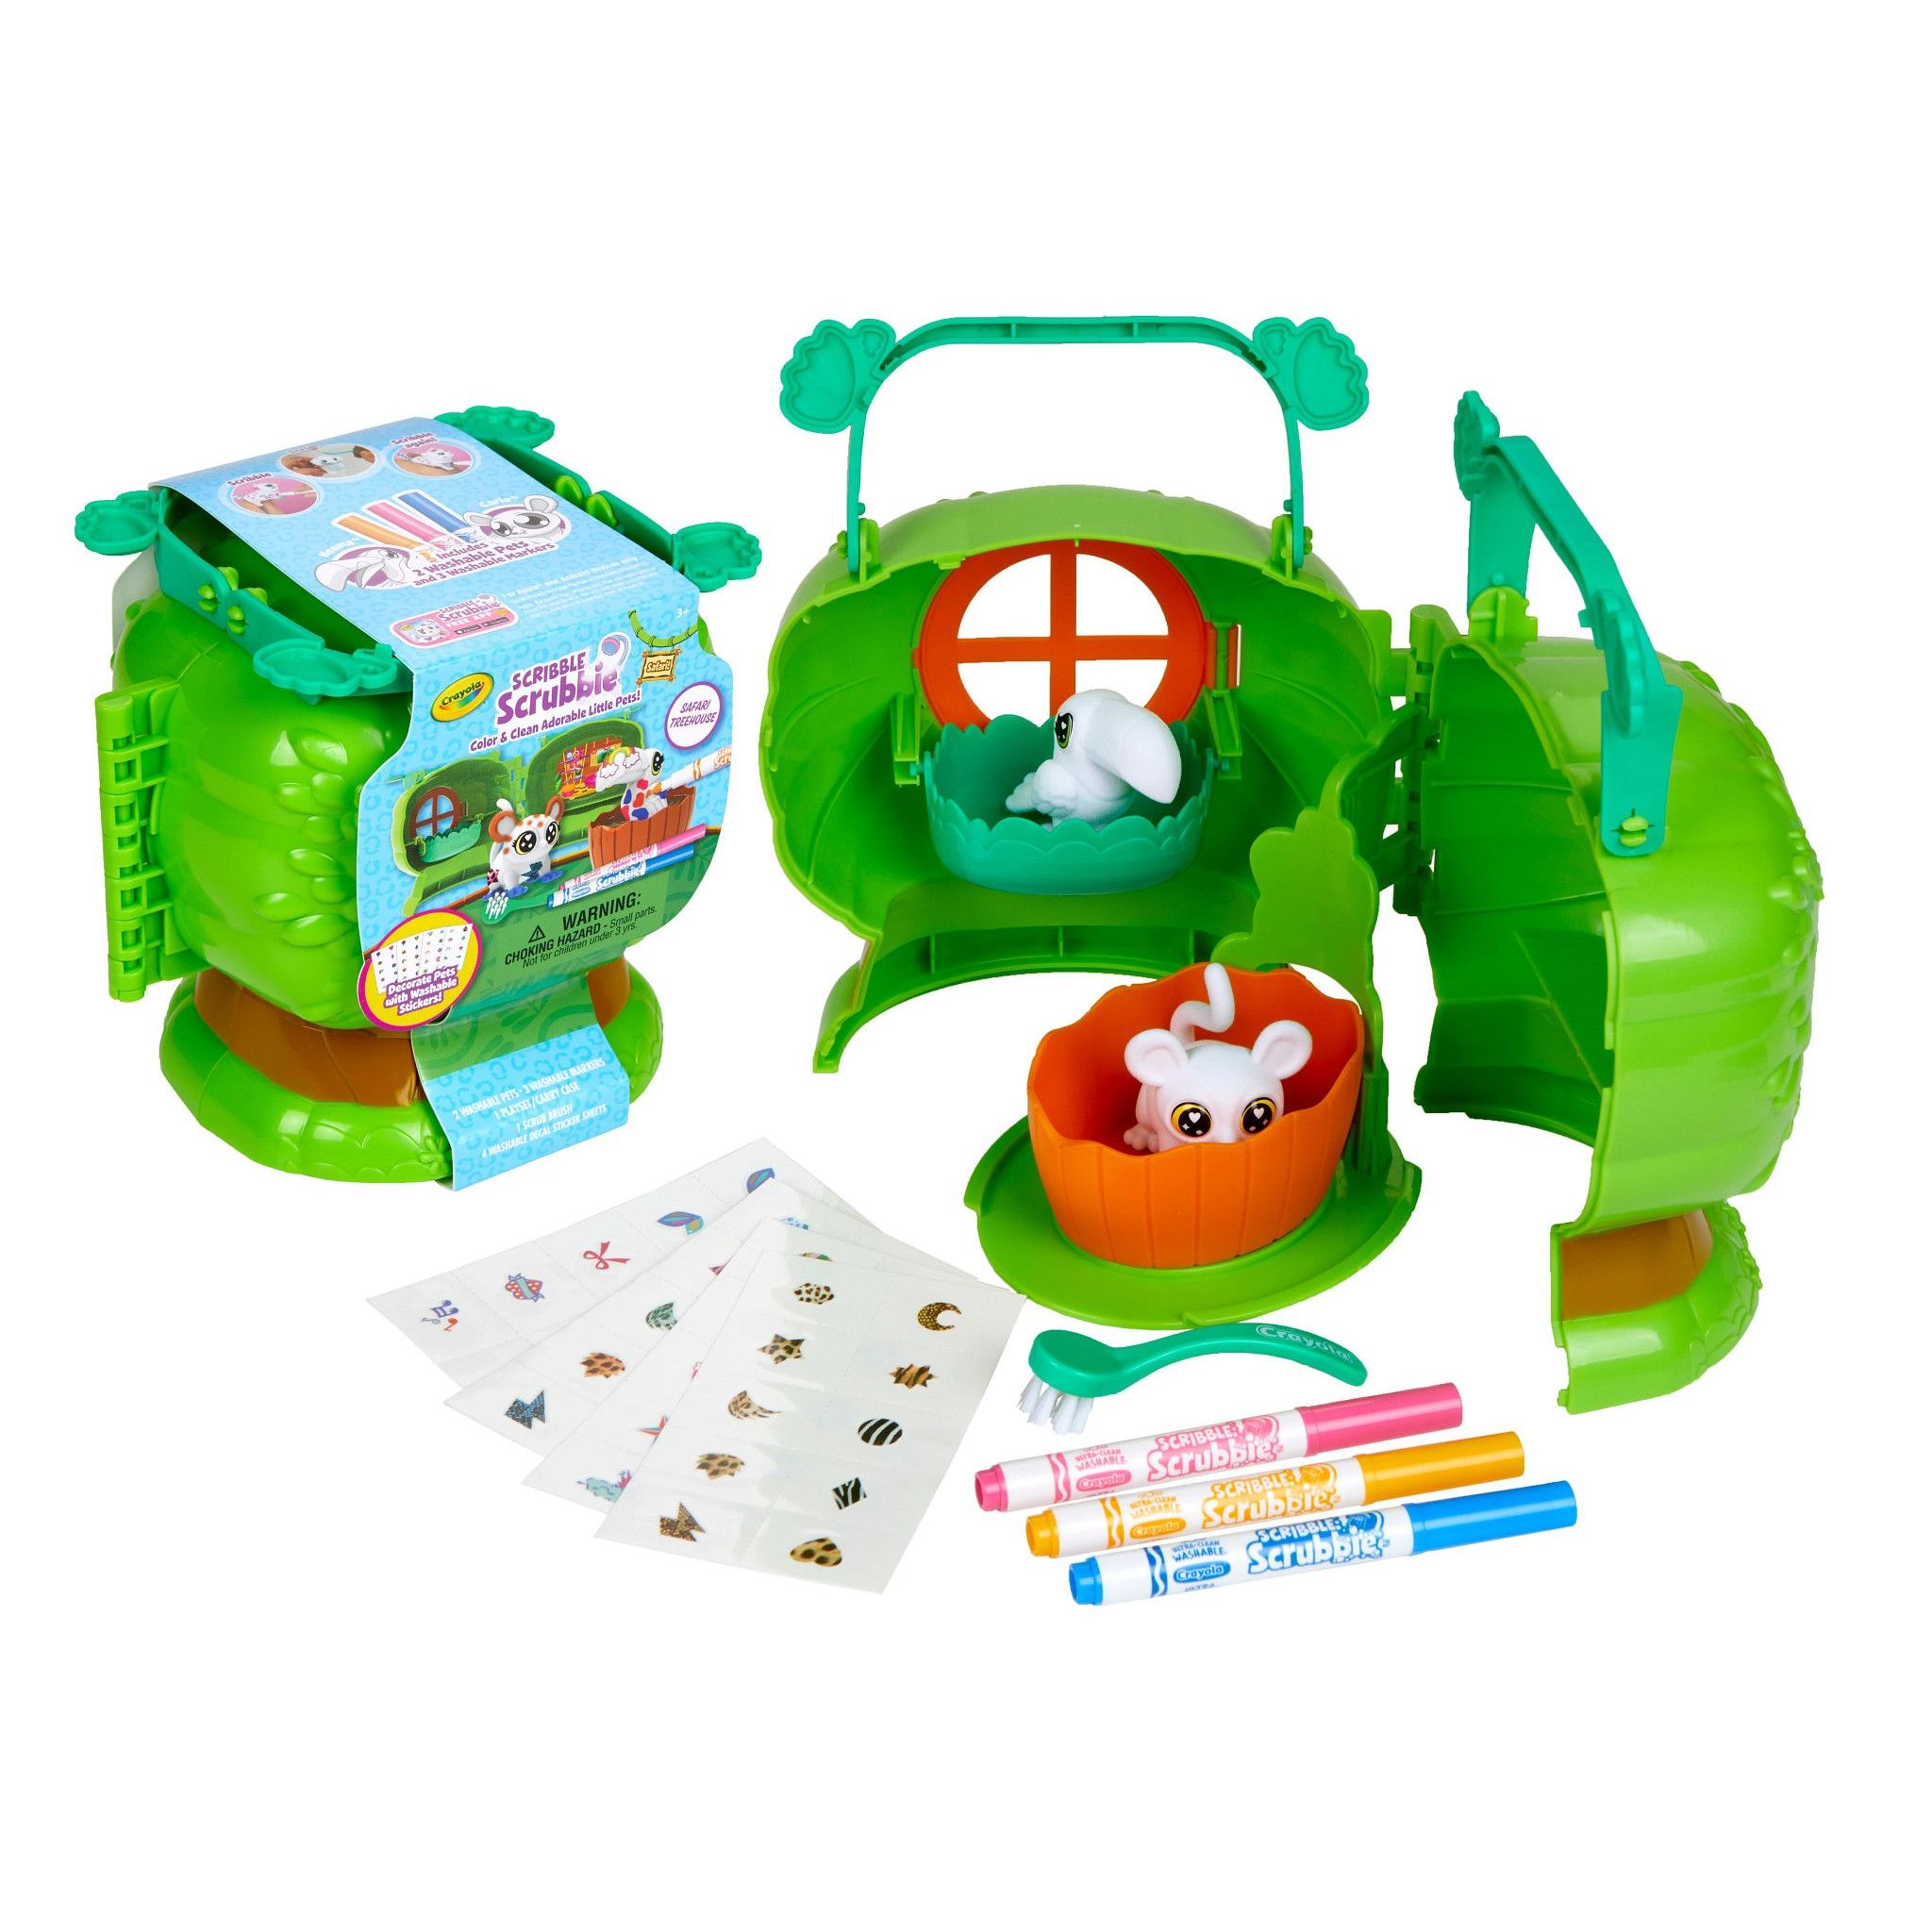 Crayola Scribble Scrubbie Pets Safari Treehouse Toy Set, Coloring Toys & Gifts, Beginner Unisex Child - image 1 of 9